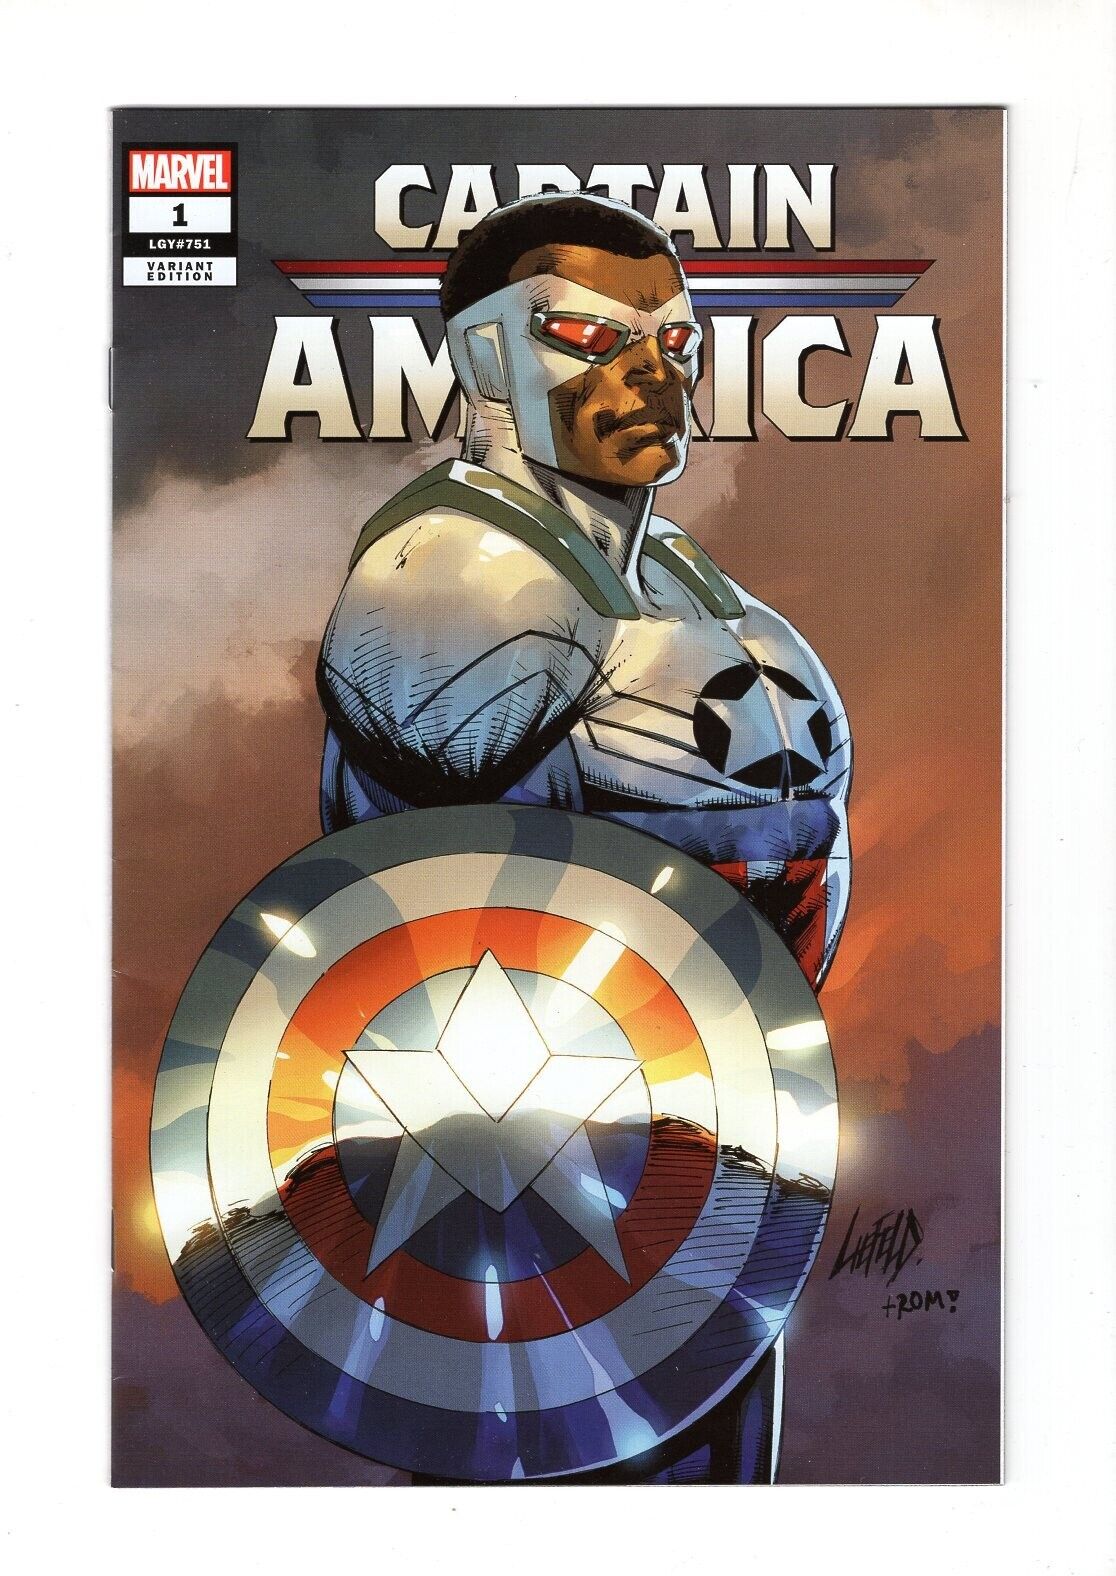 CAPTAIN AMERICA #1 ROB LIEFELD & WHATNOT EXCLUSIVE NYCC TRADE VARIANT NM MARVEL